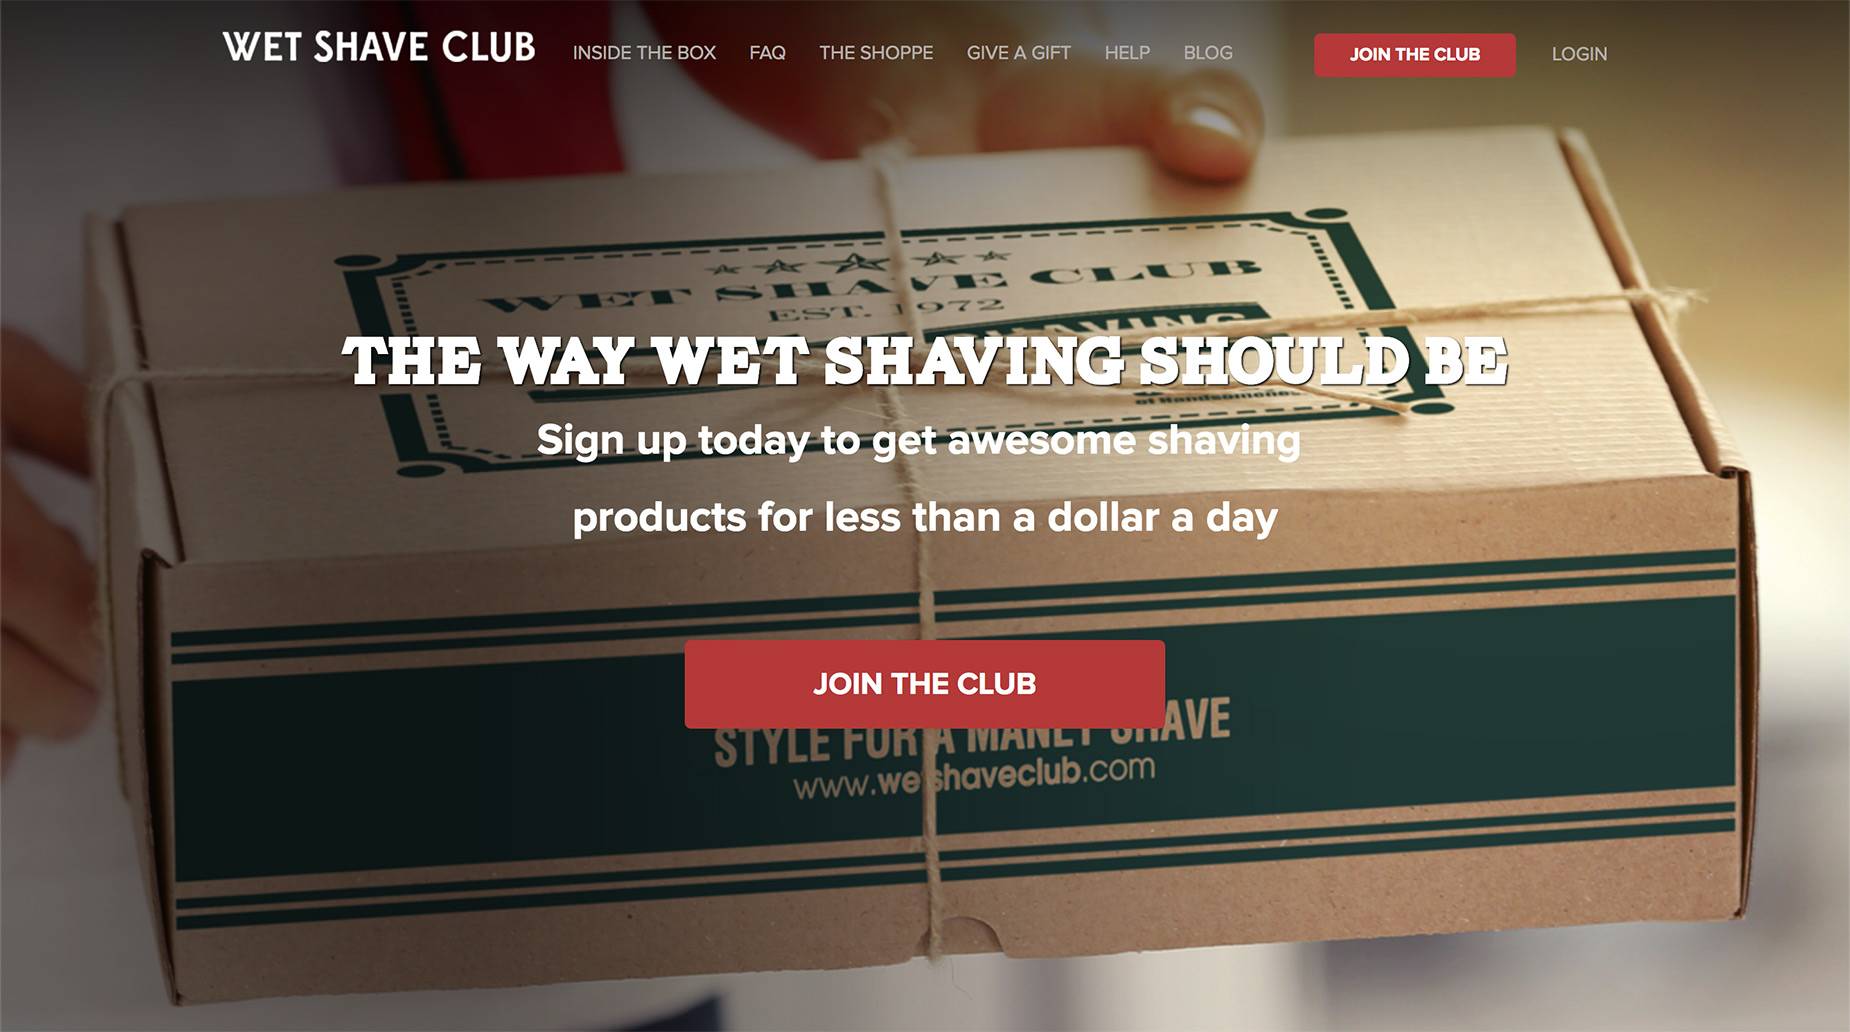 Wet Shave Club's product landing page